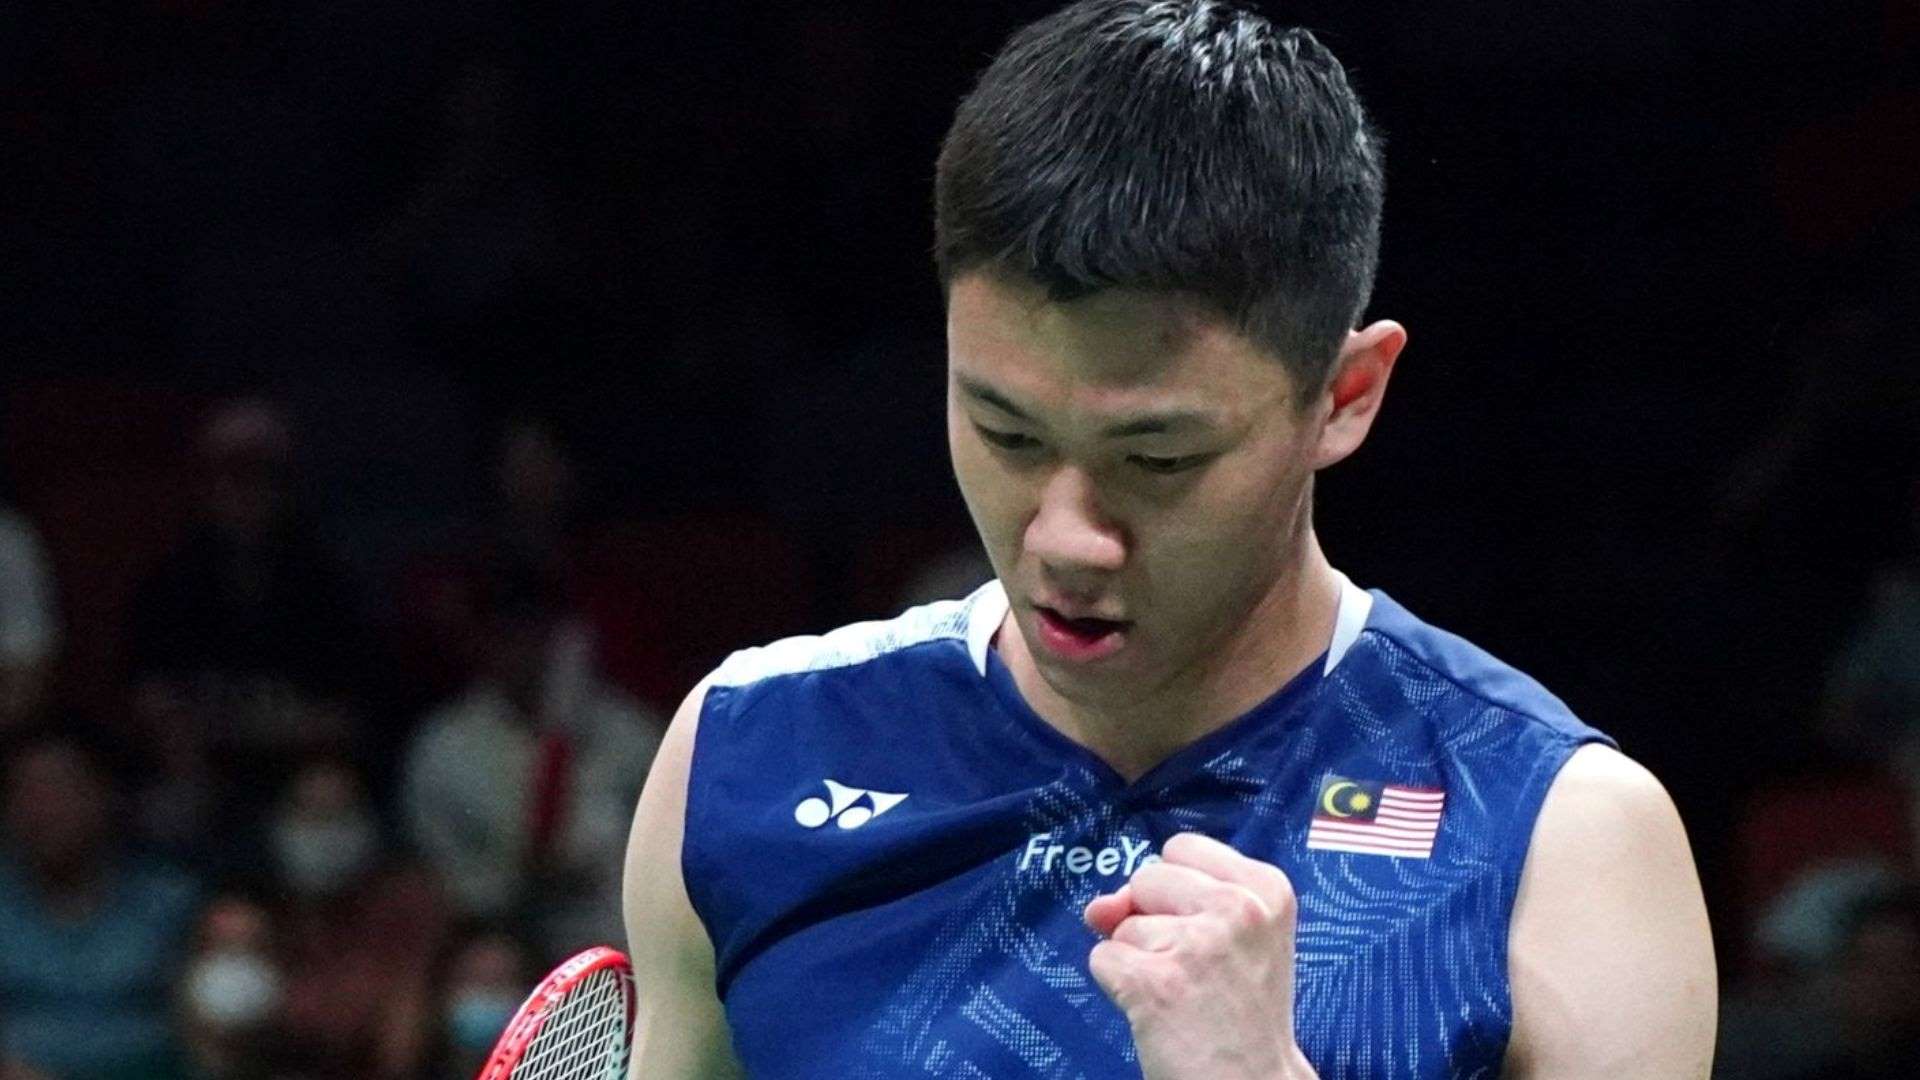 Lee Zii Jia during a match (Image Credits - Twitter)